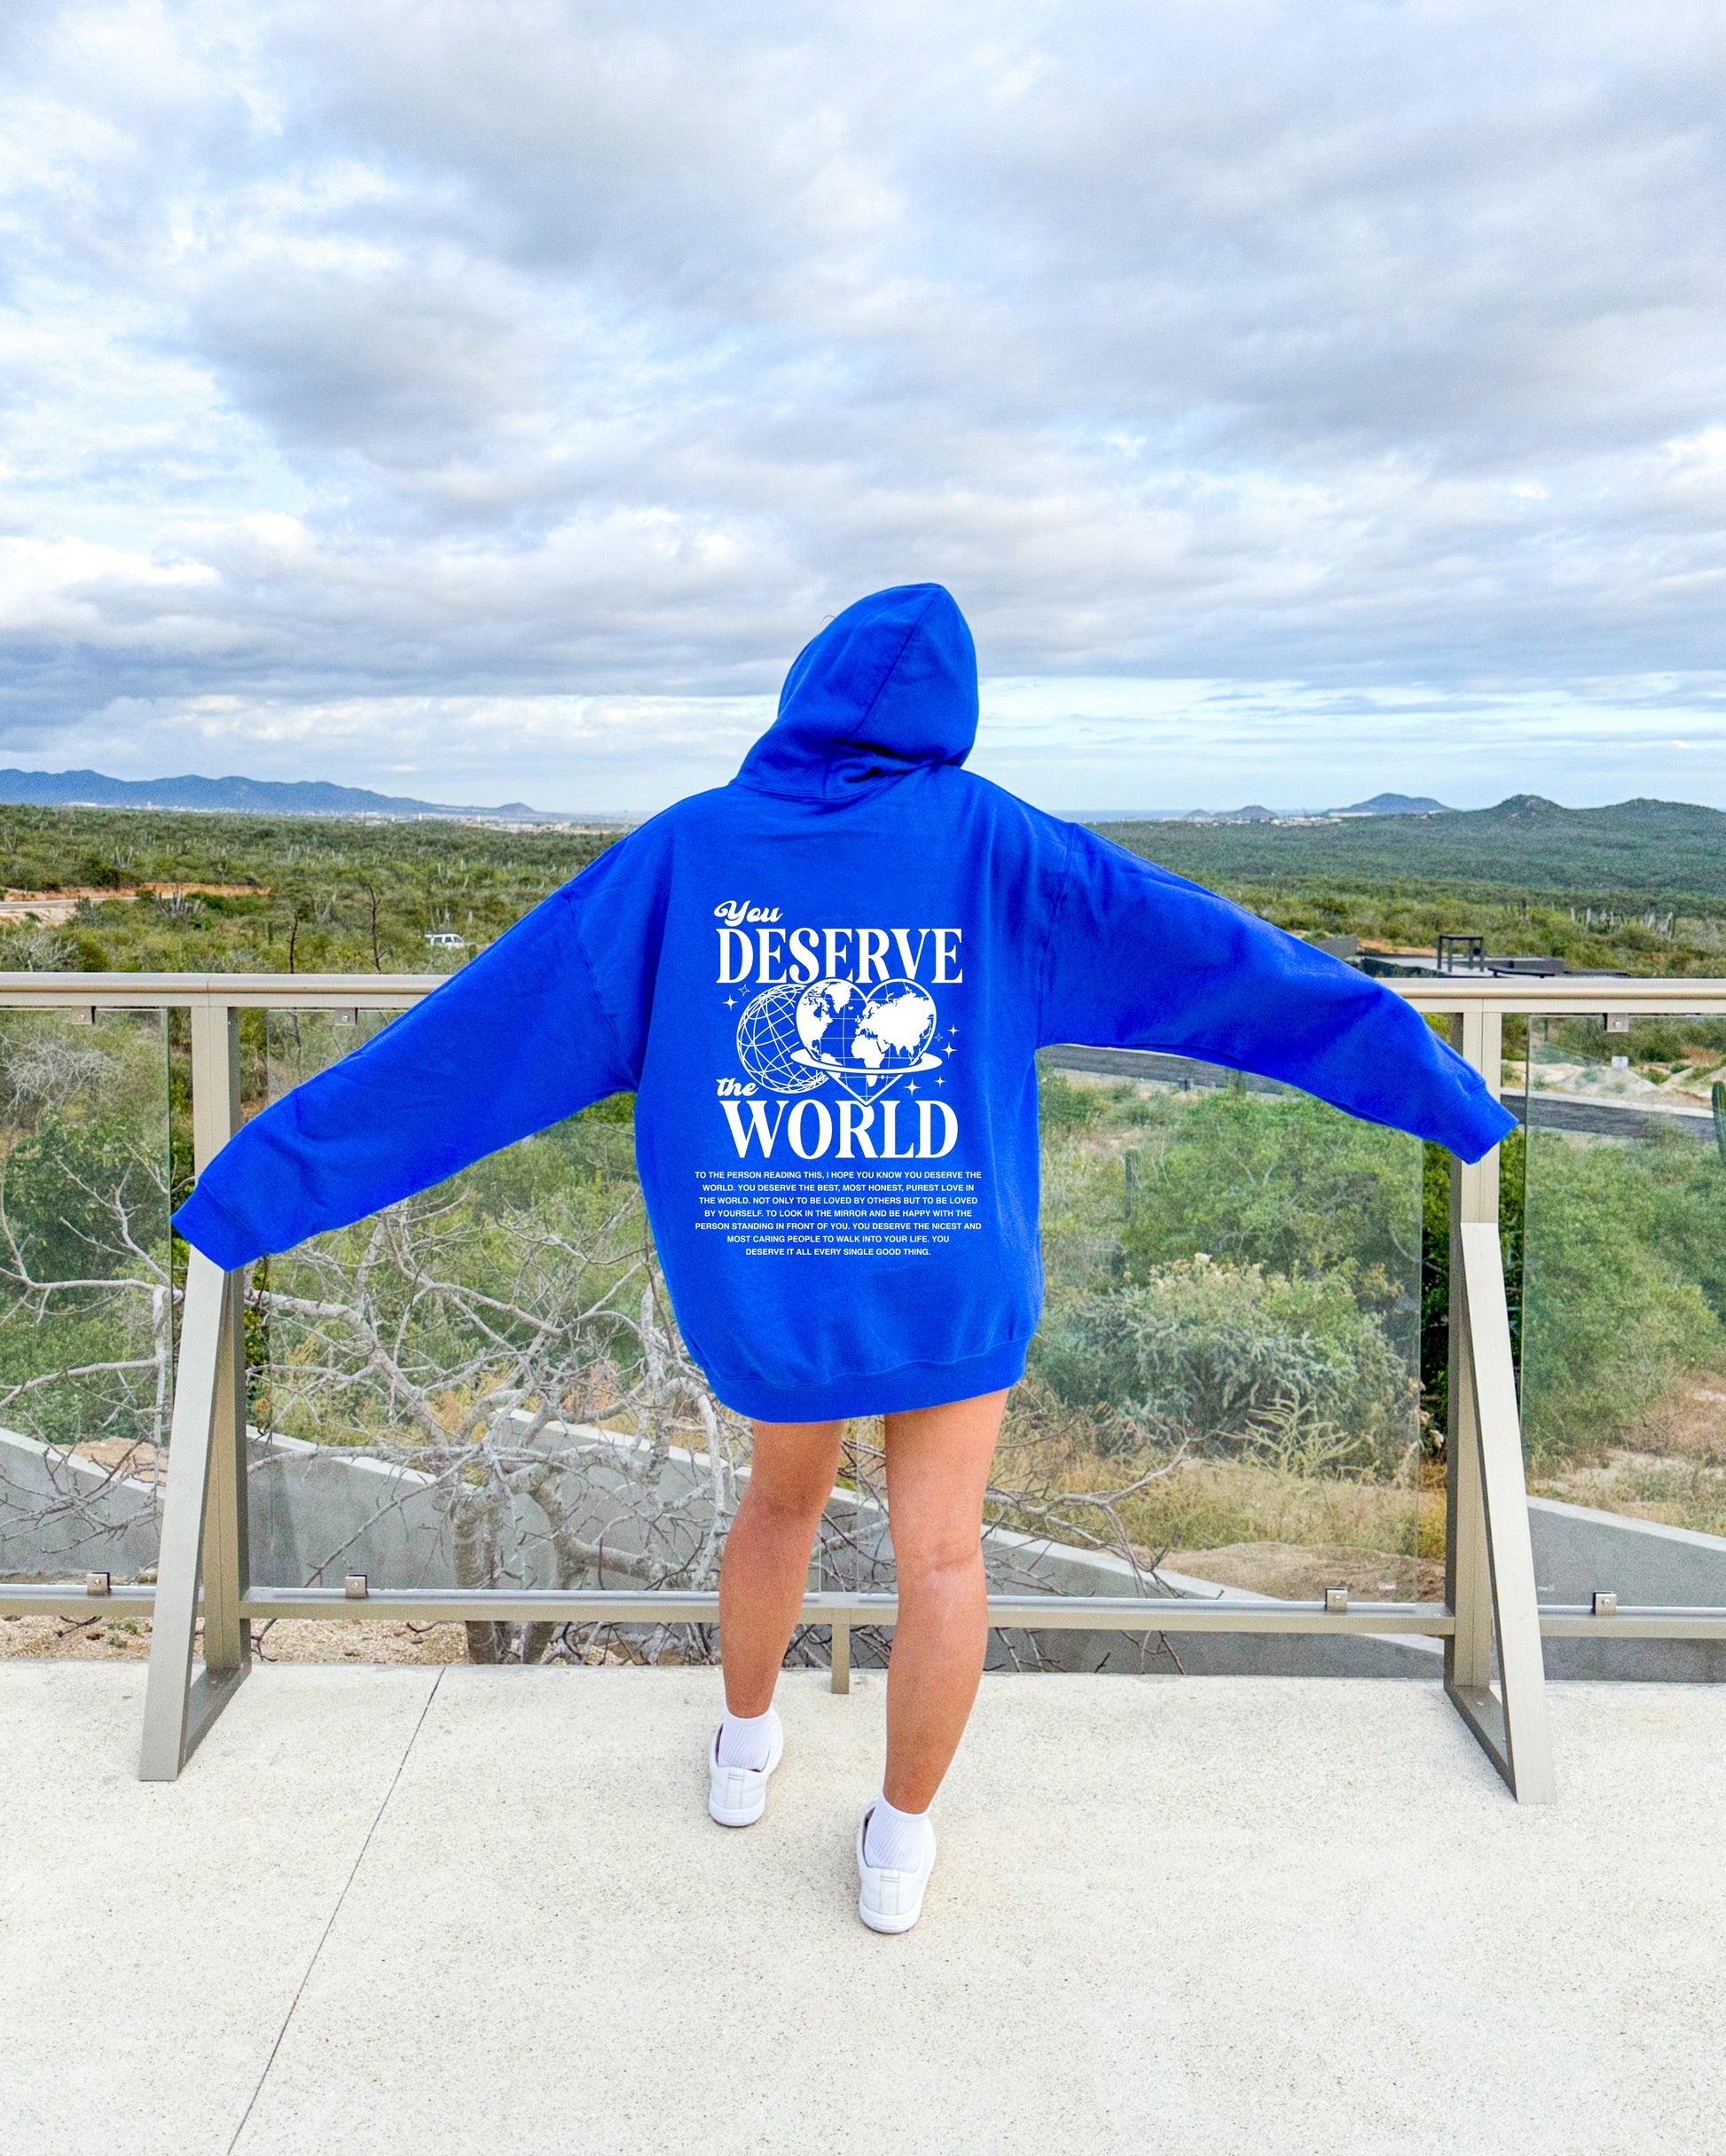 You Deserve The World Hoodie - White - Blank Canvas Fashion